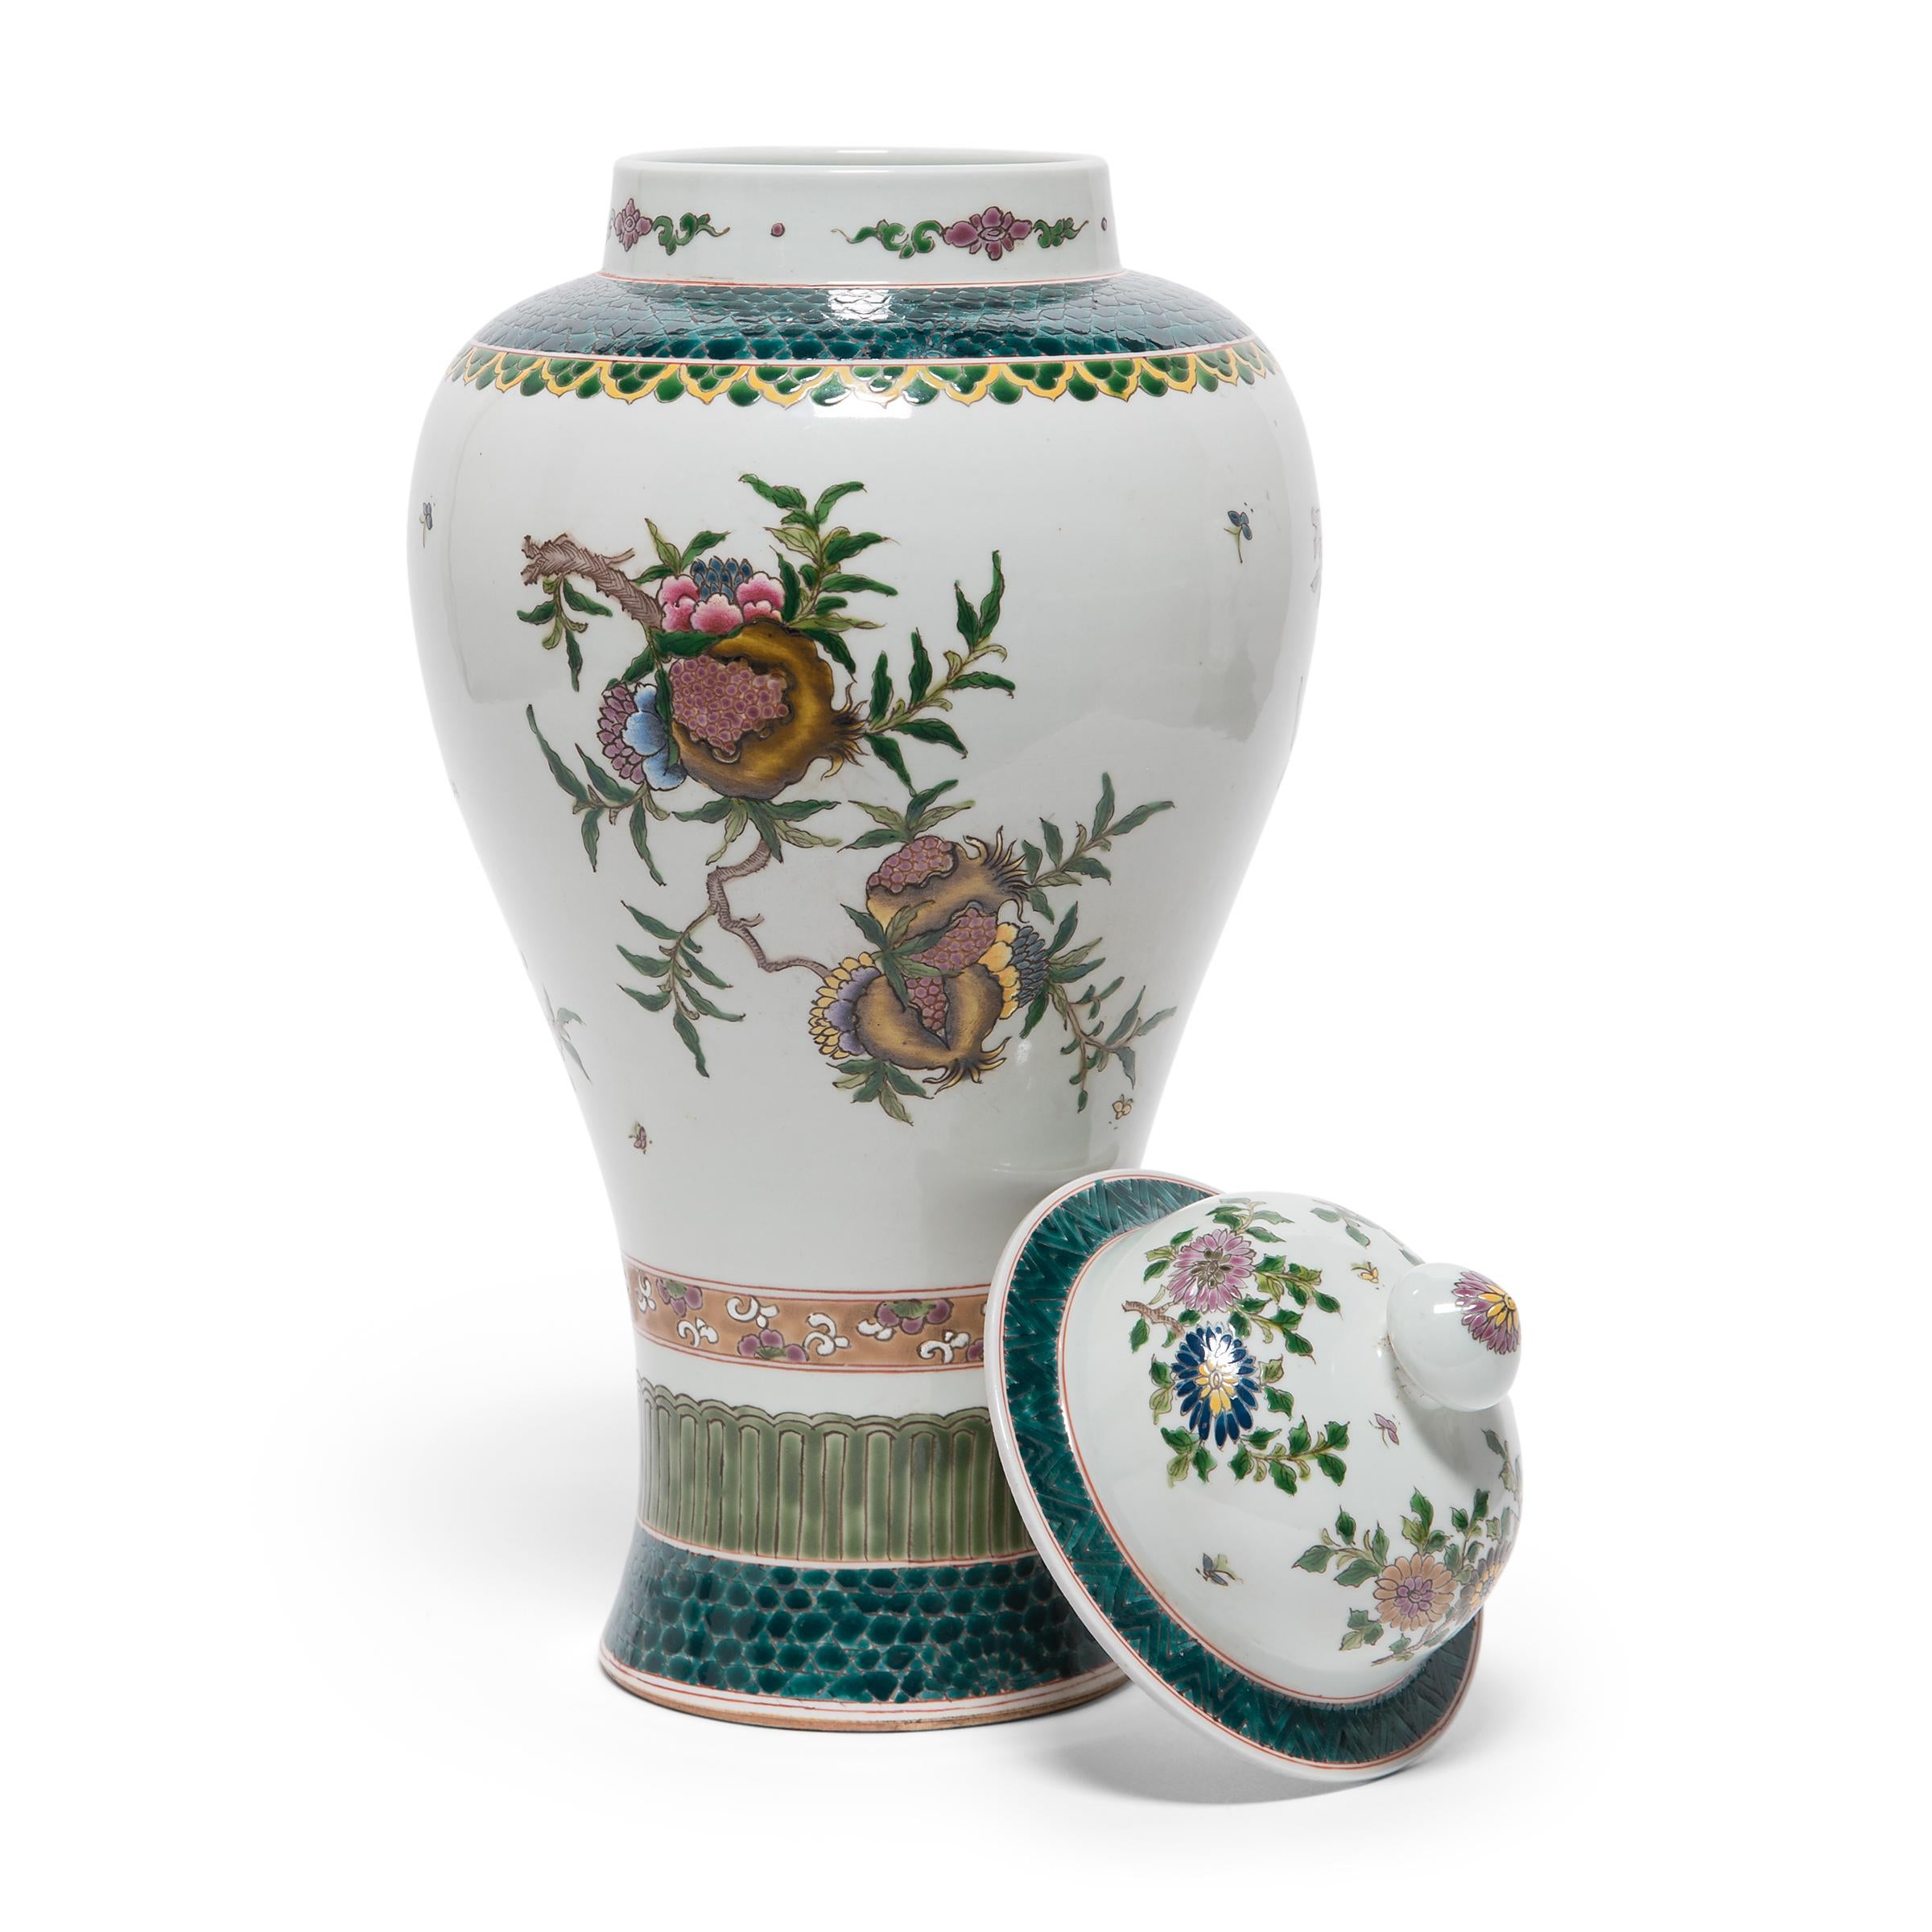 20th Century Pair of Chinese Famille Verte Baluster Jars with Pomegranates, c. 1900